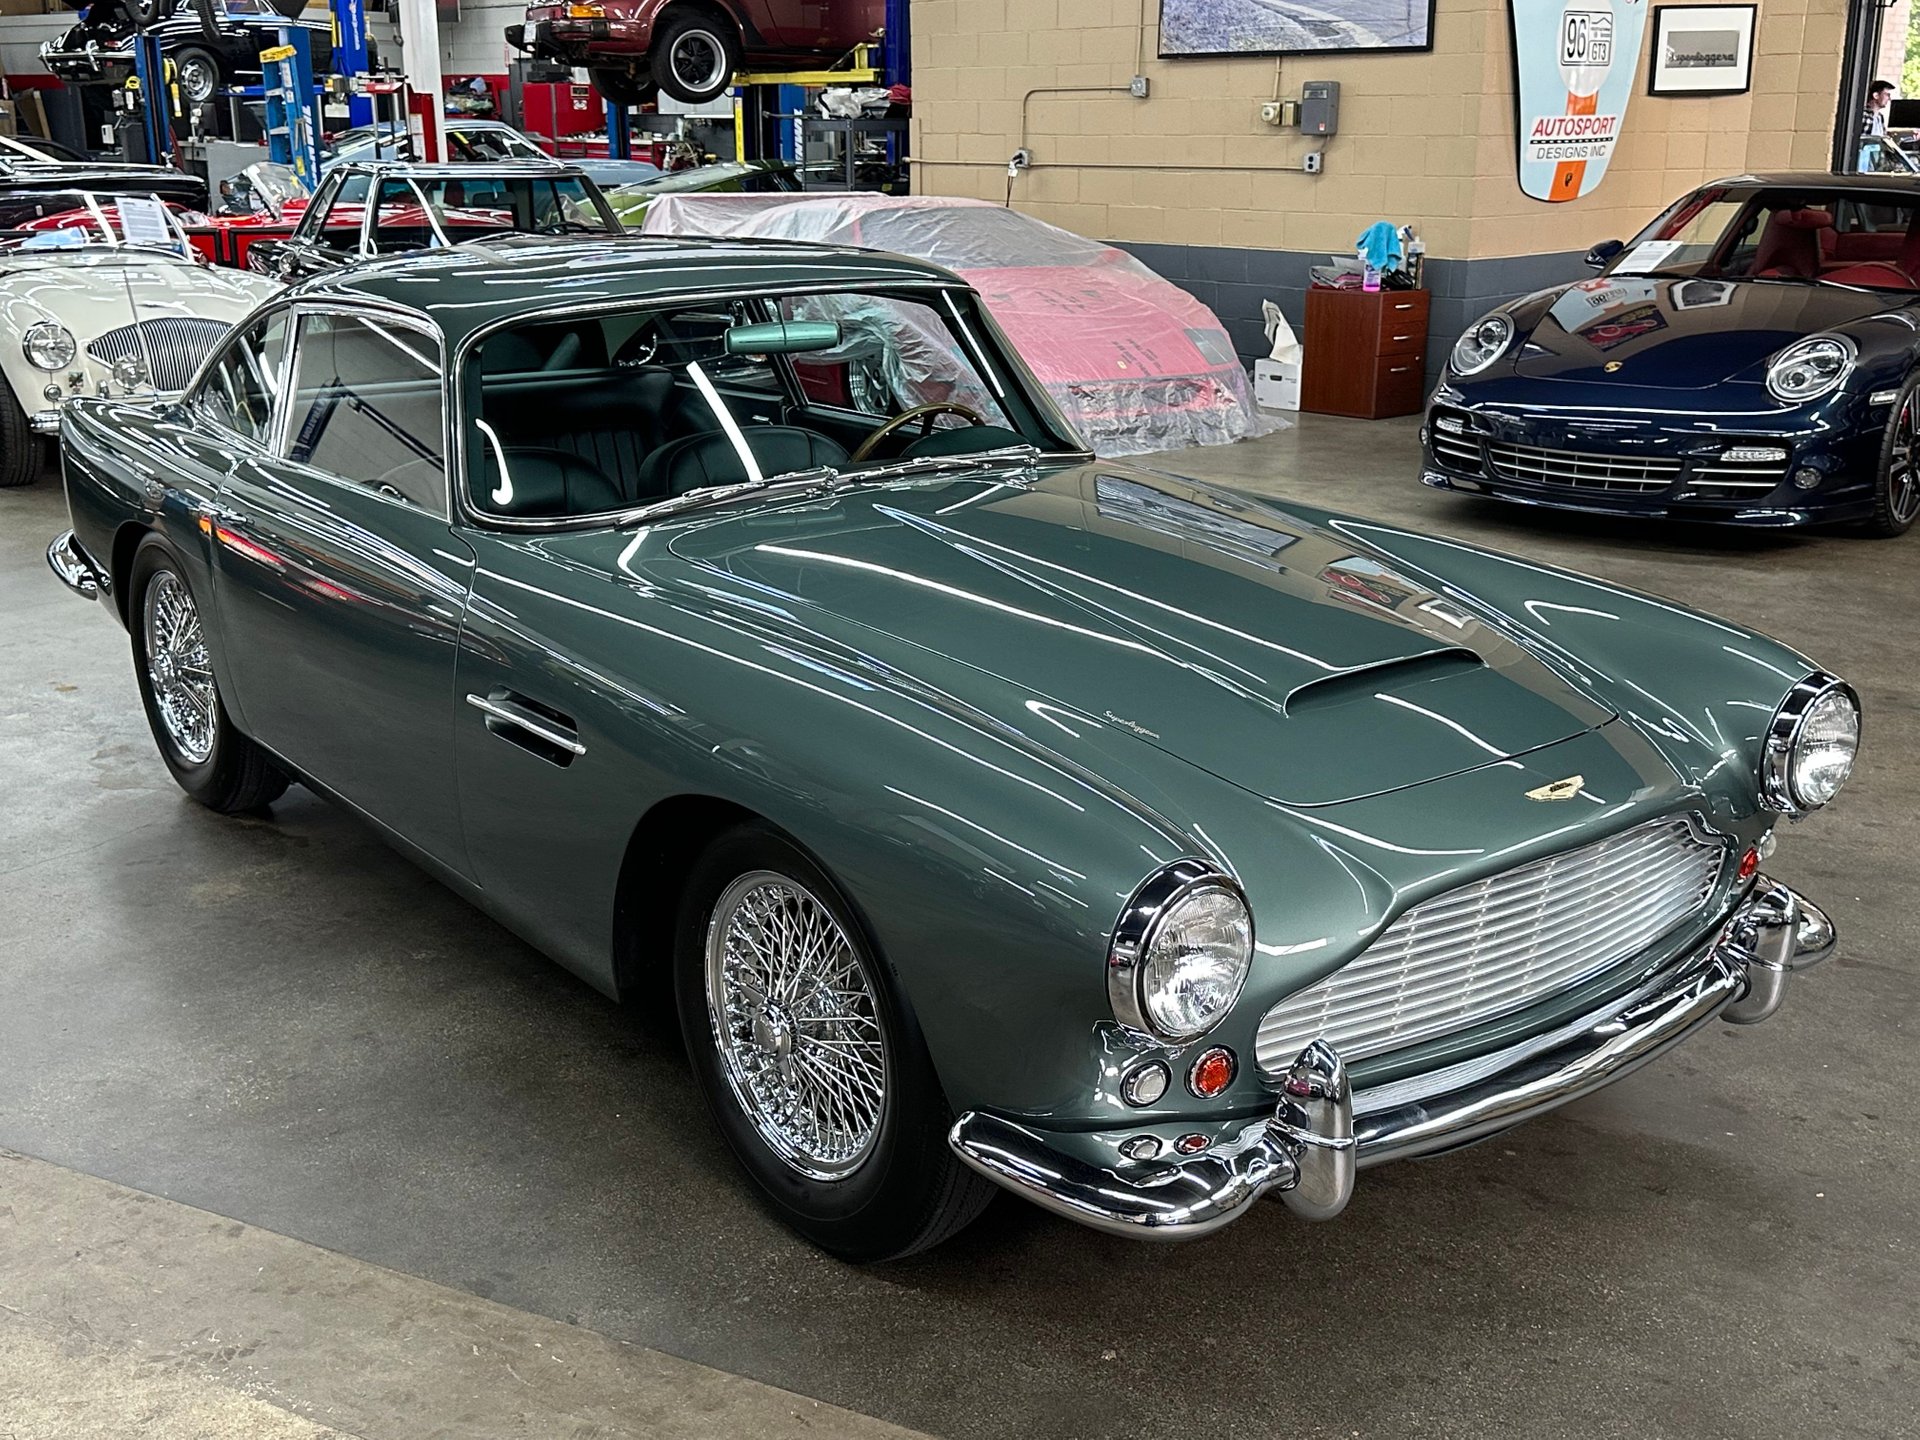 1962 Aston Martin DB4 Series IV Coupe | Autosport Designs, Inc. | Exotic,  Vintage, and Classic Car Sales